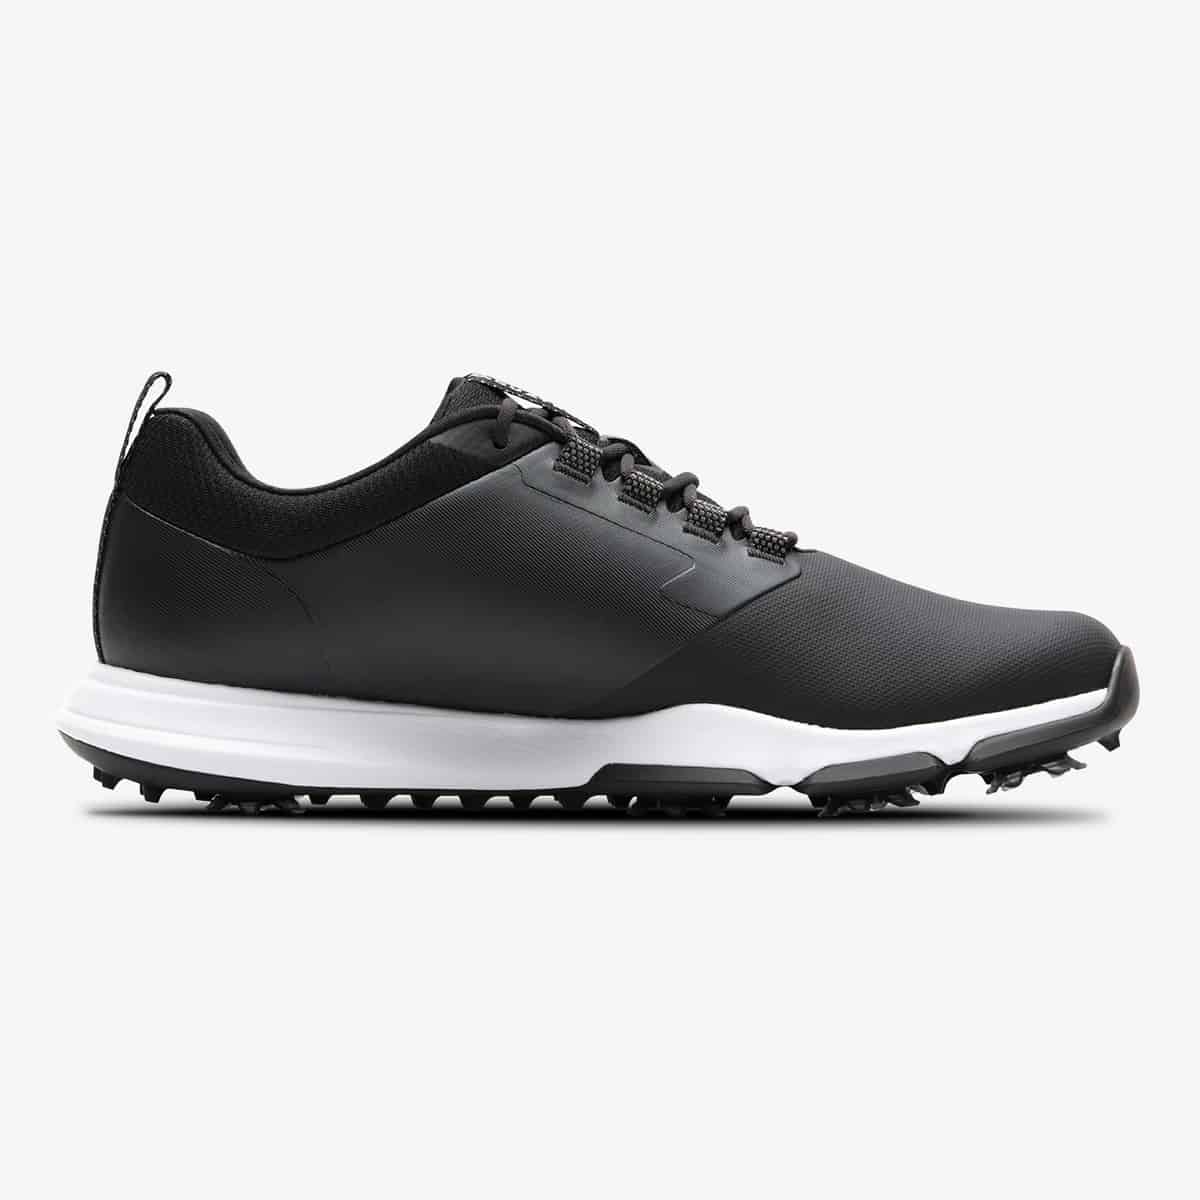 Cuater the Ringer Golf Shoes